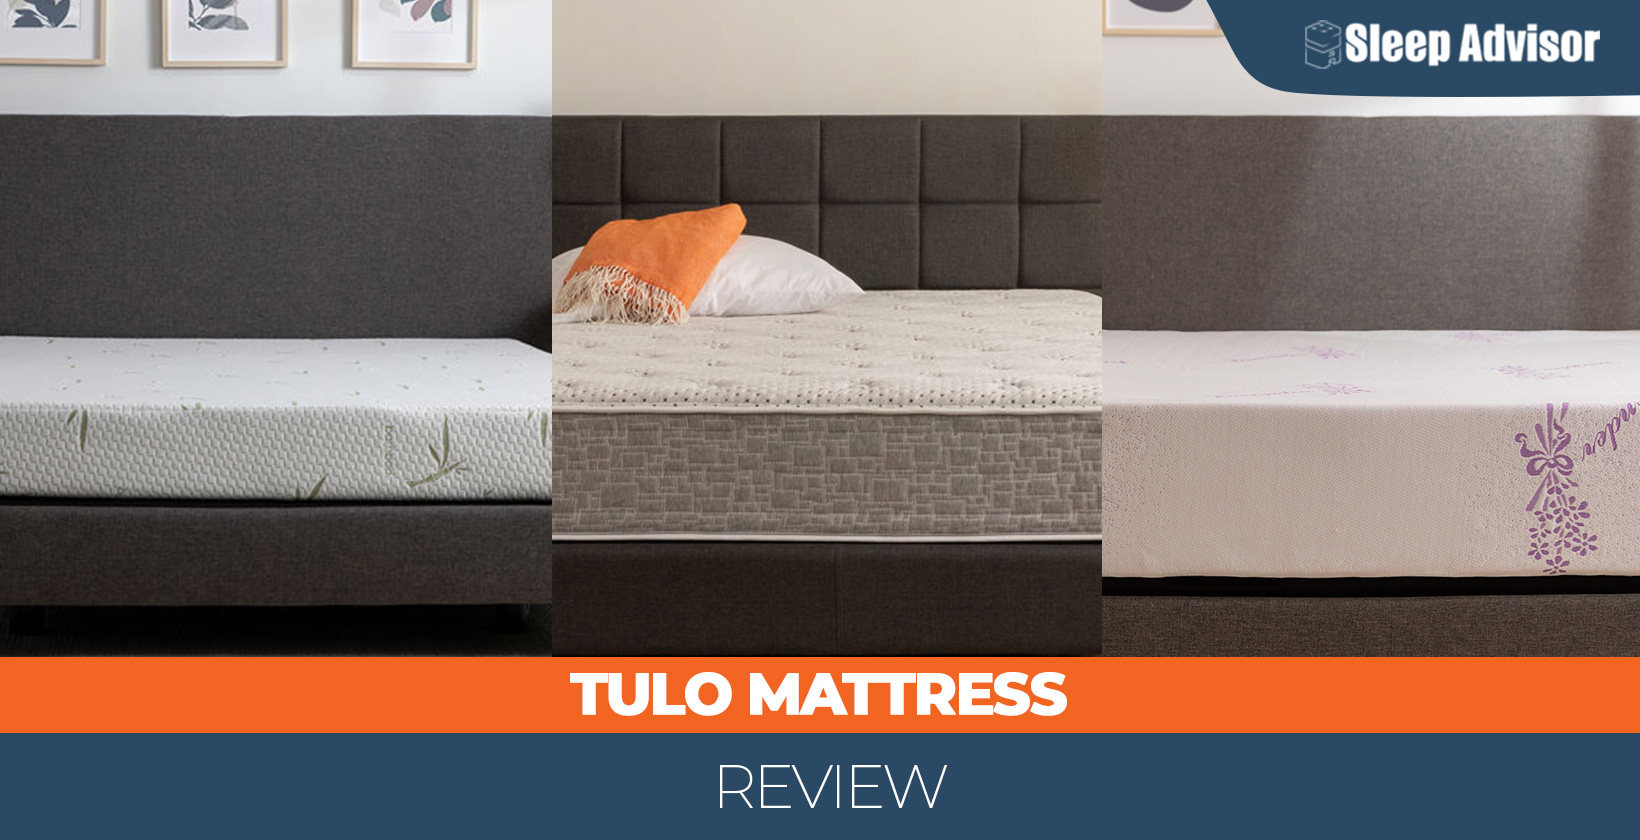 Tulo Mattress Review and Prices